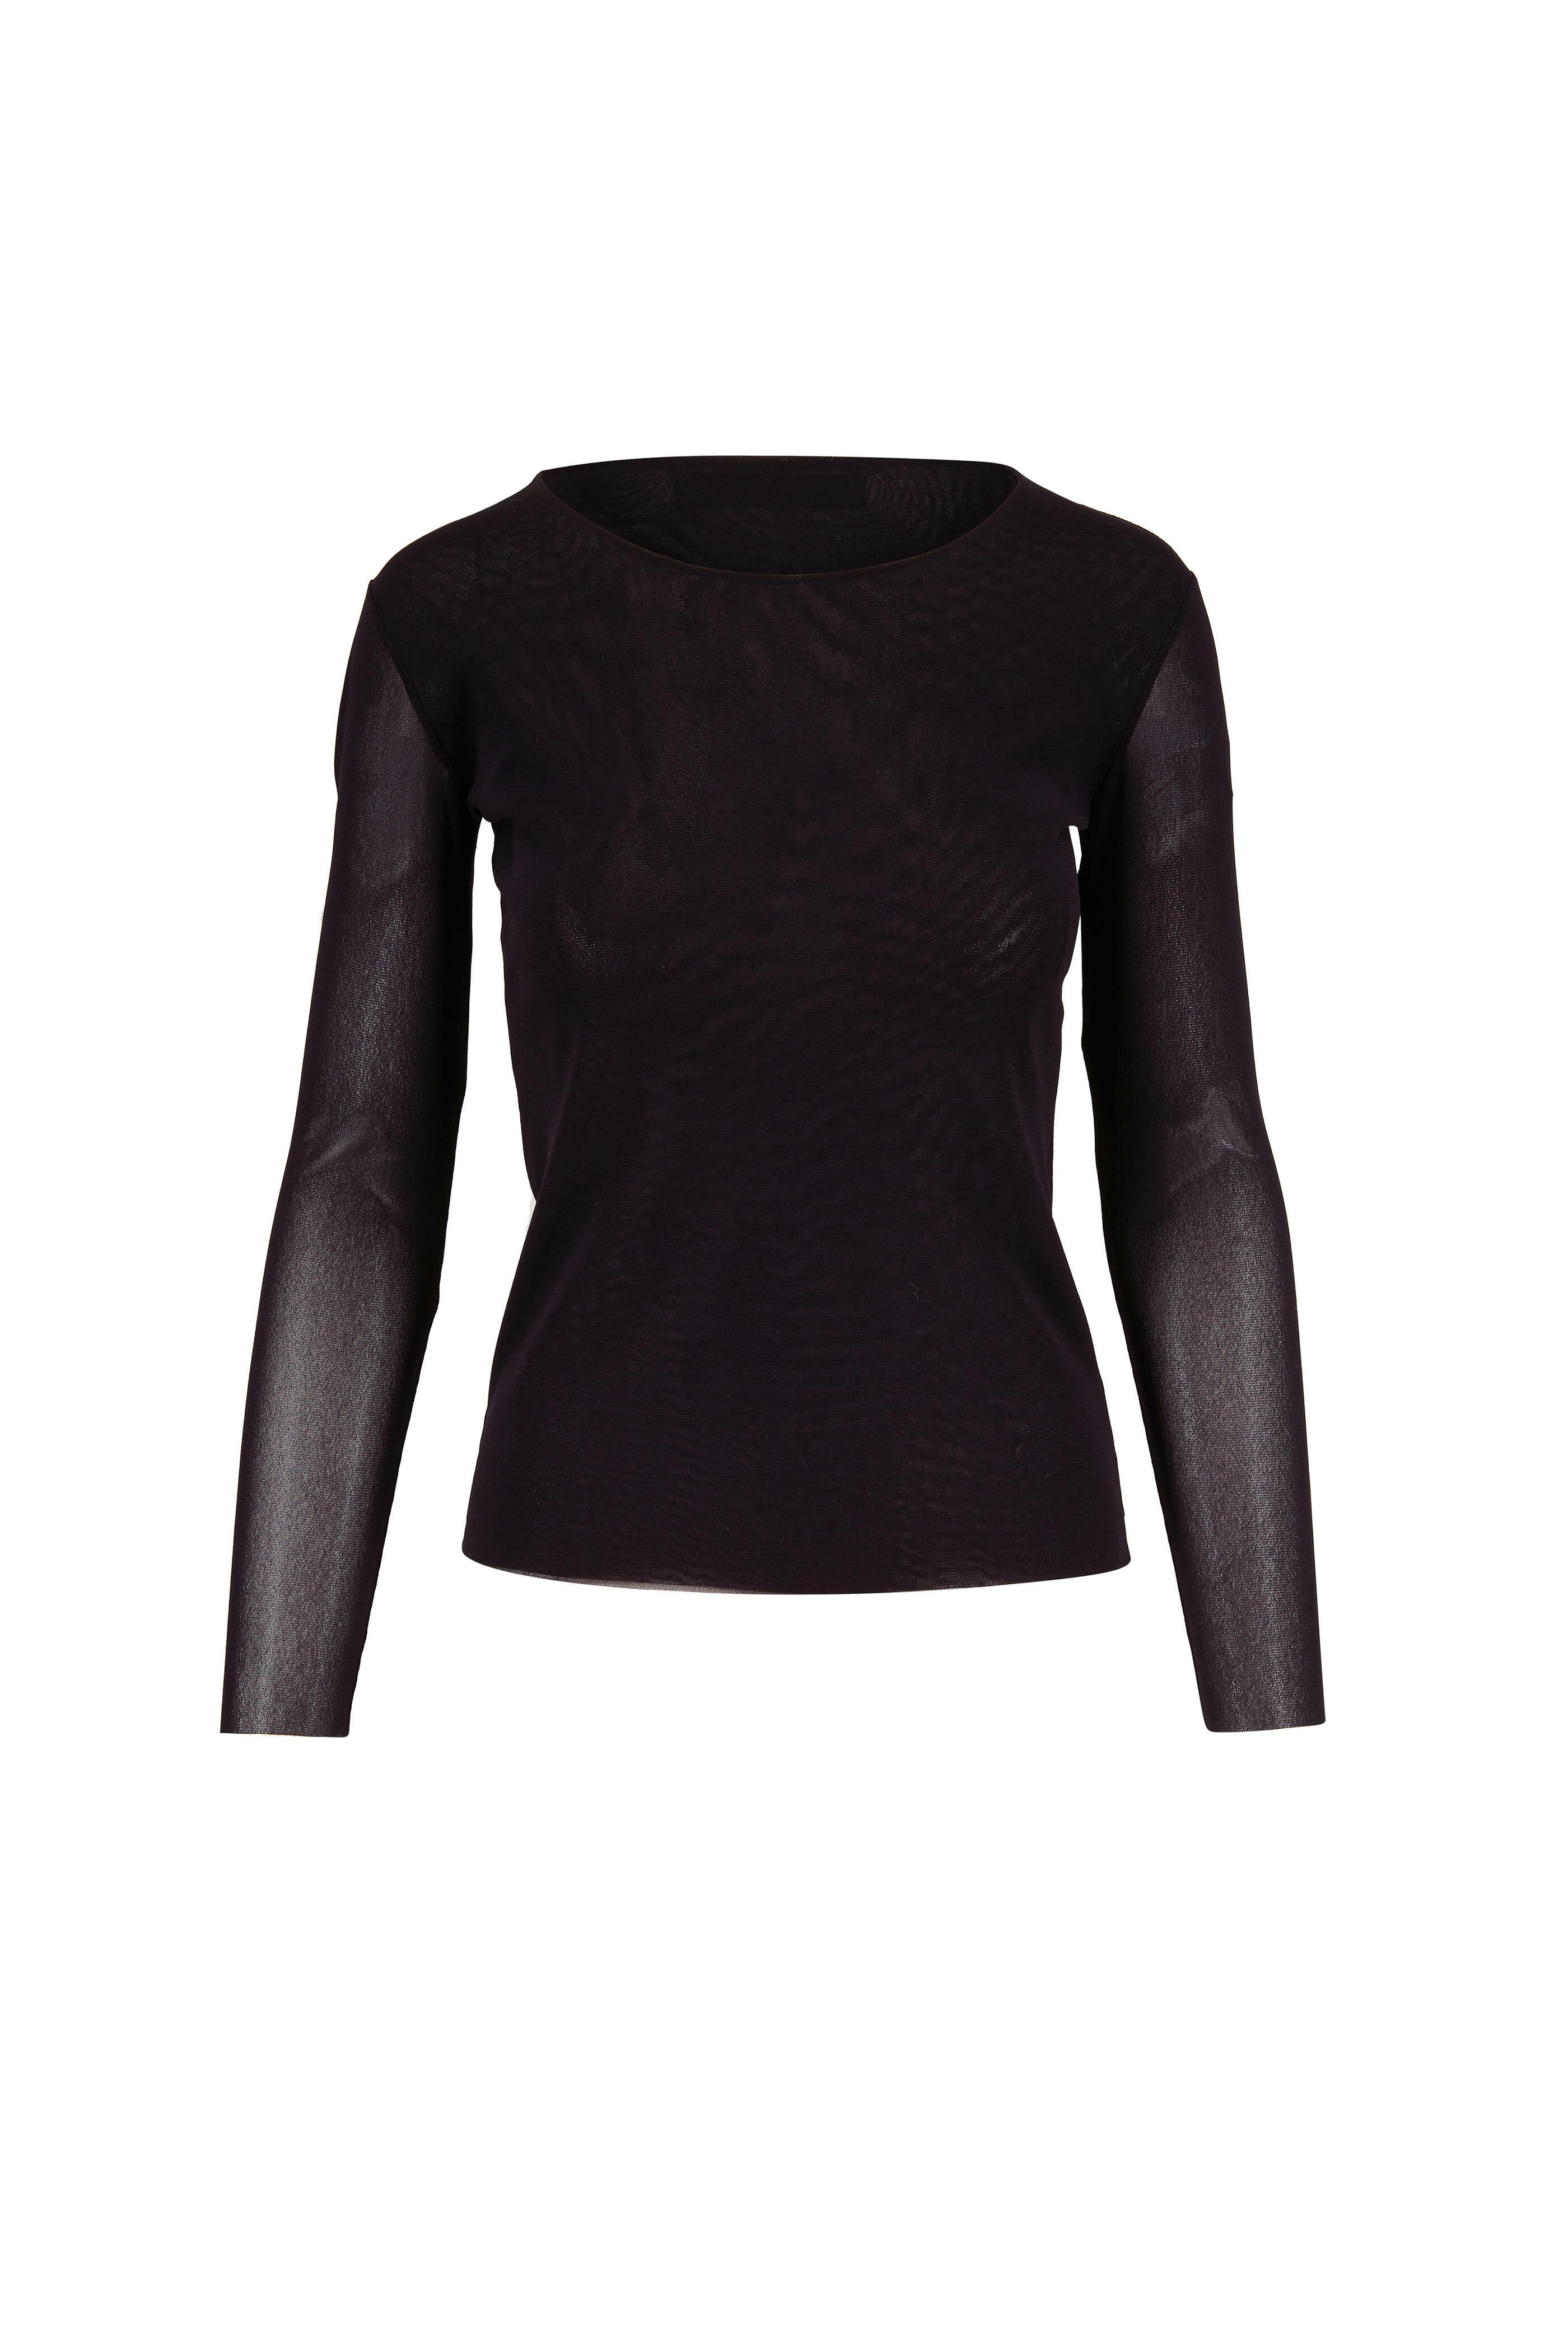 D.Exterior - Black Stretch Tulle Sheer Sleeve Blouse